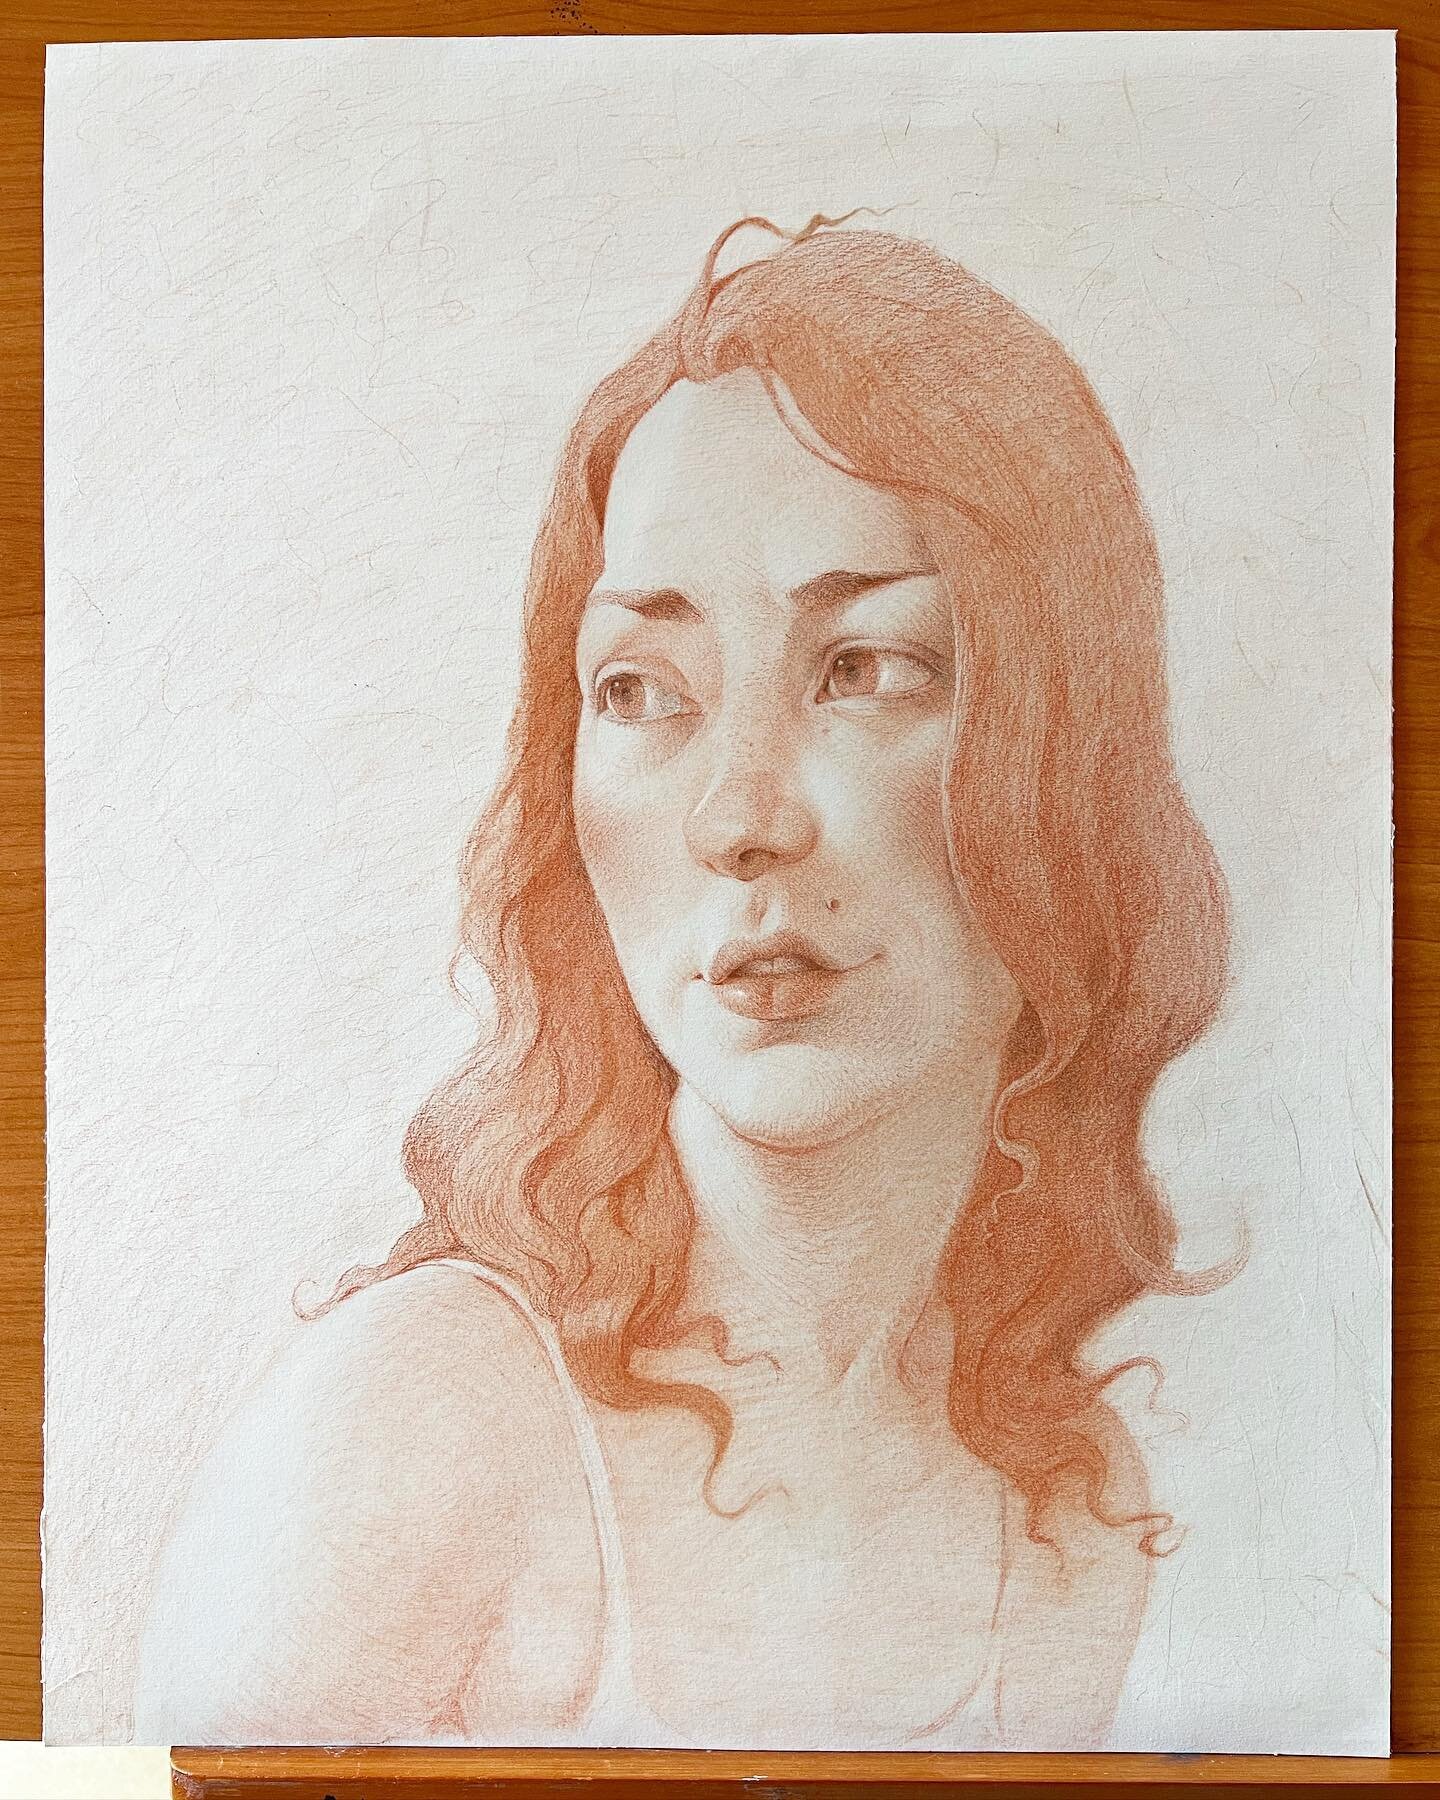 Another #drawing I was able to finish in Ukiah.  Enjoyed working in the natural light.  #portrait #realism #sanguinechalk #figuredrawing @bostonbandit